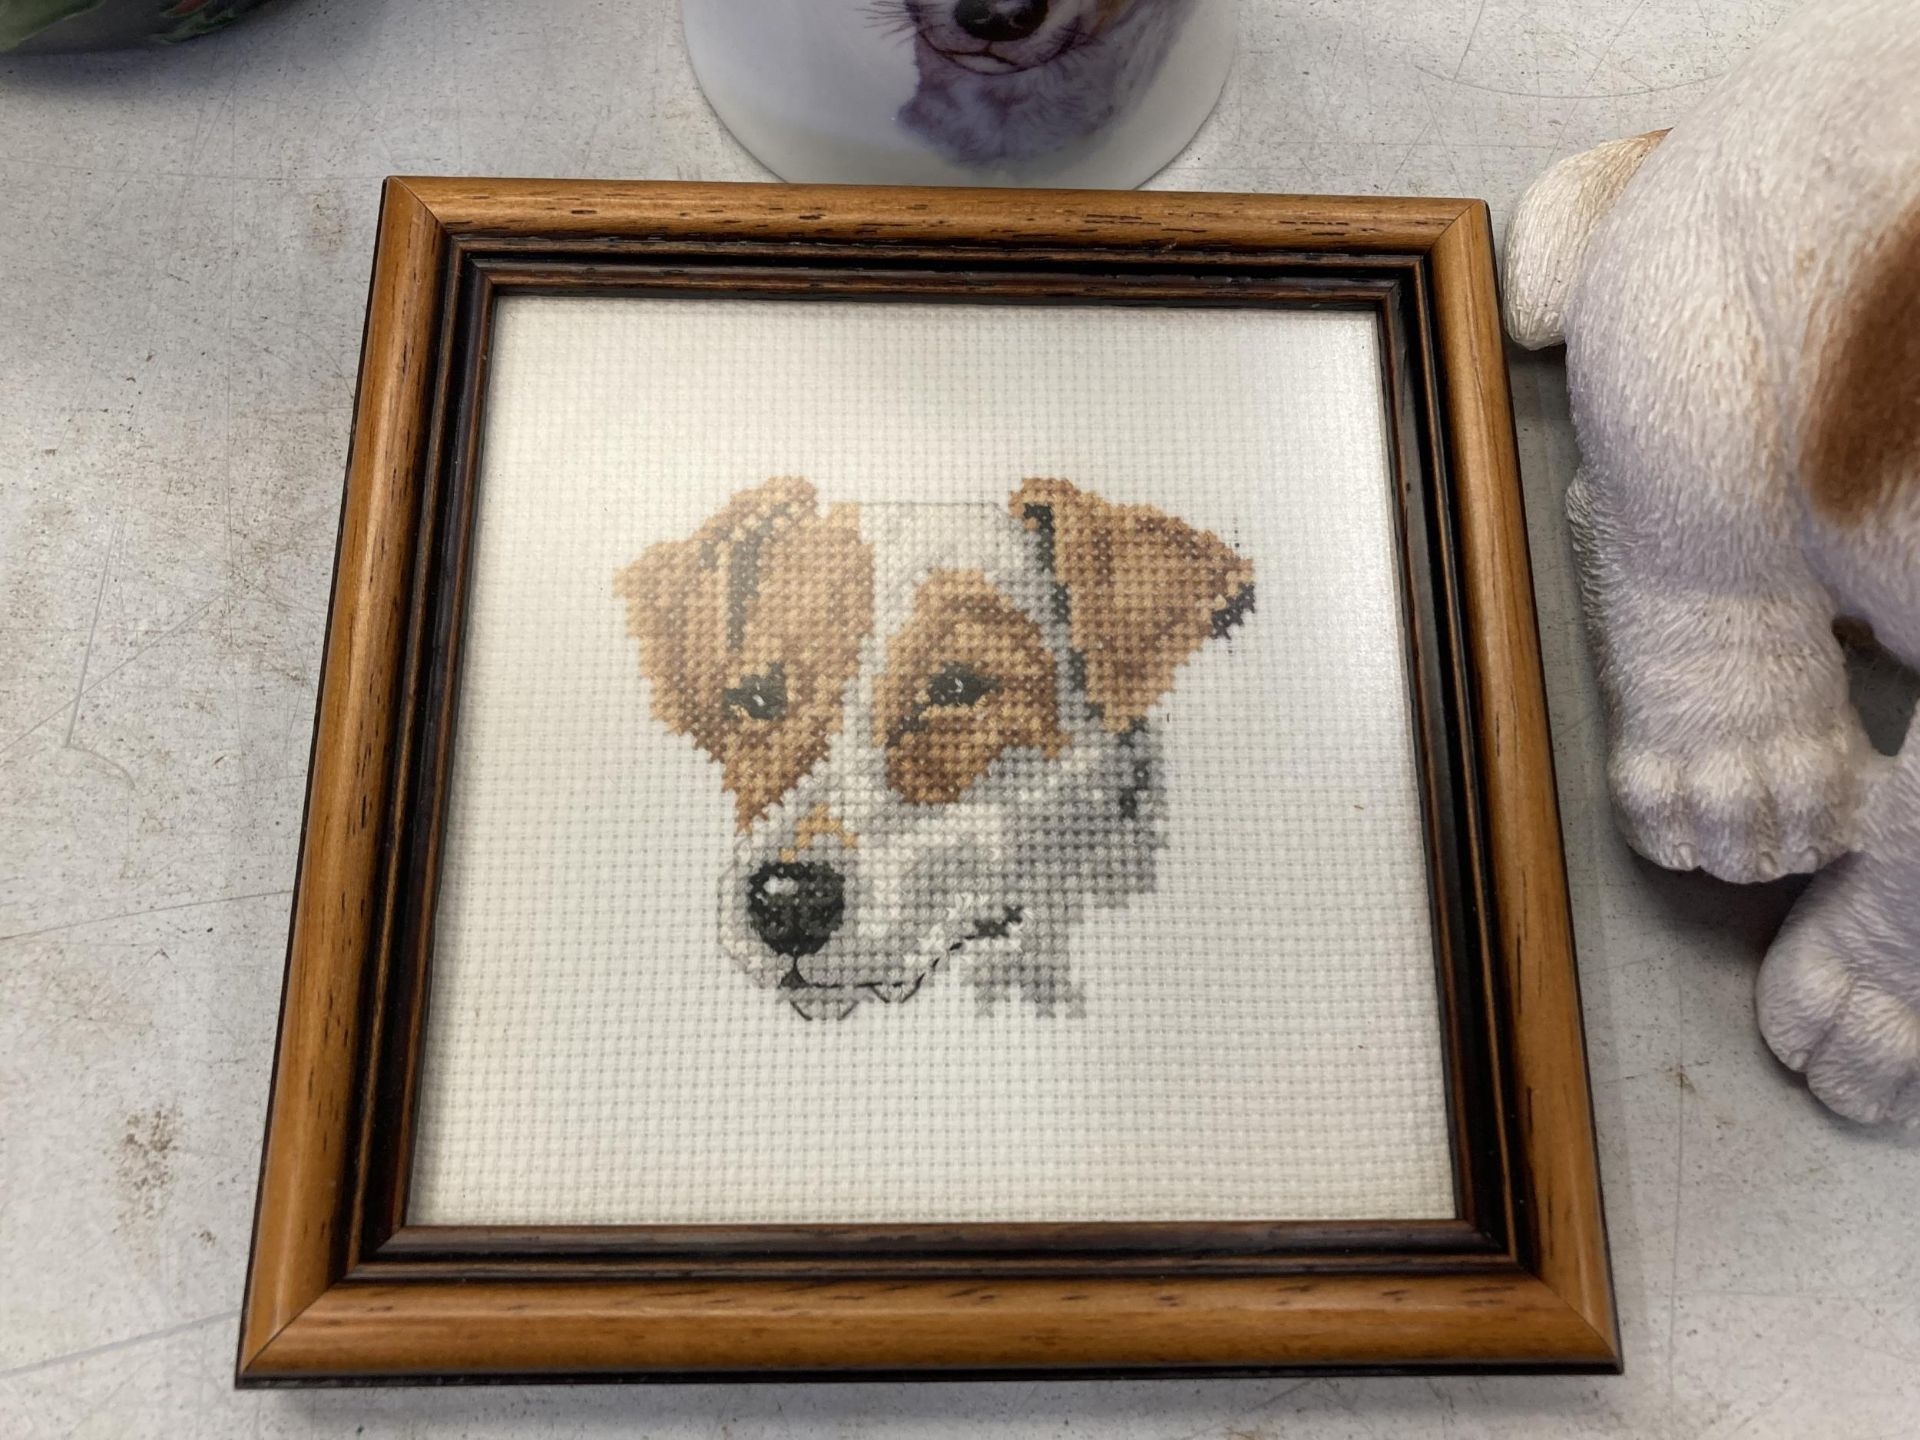 A GROUP OF THREE JACK RUSSEL ITEMS, FIGURE, MUG AND TAPESTRY - Image 2 of 4